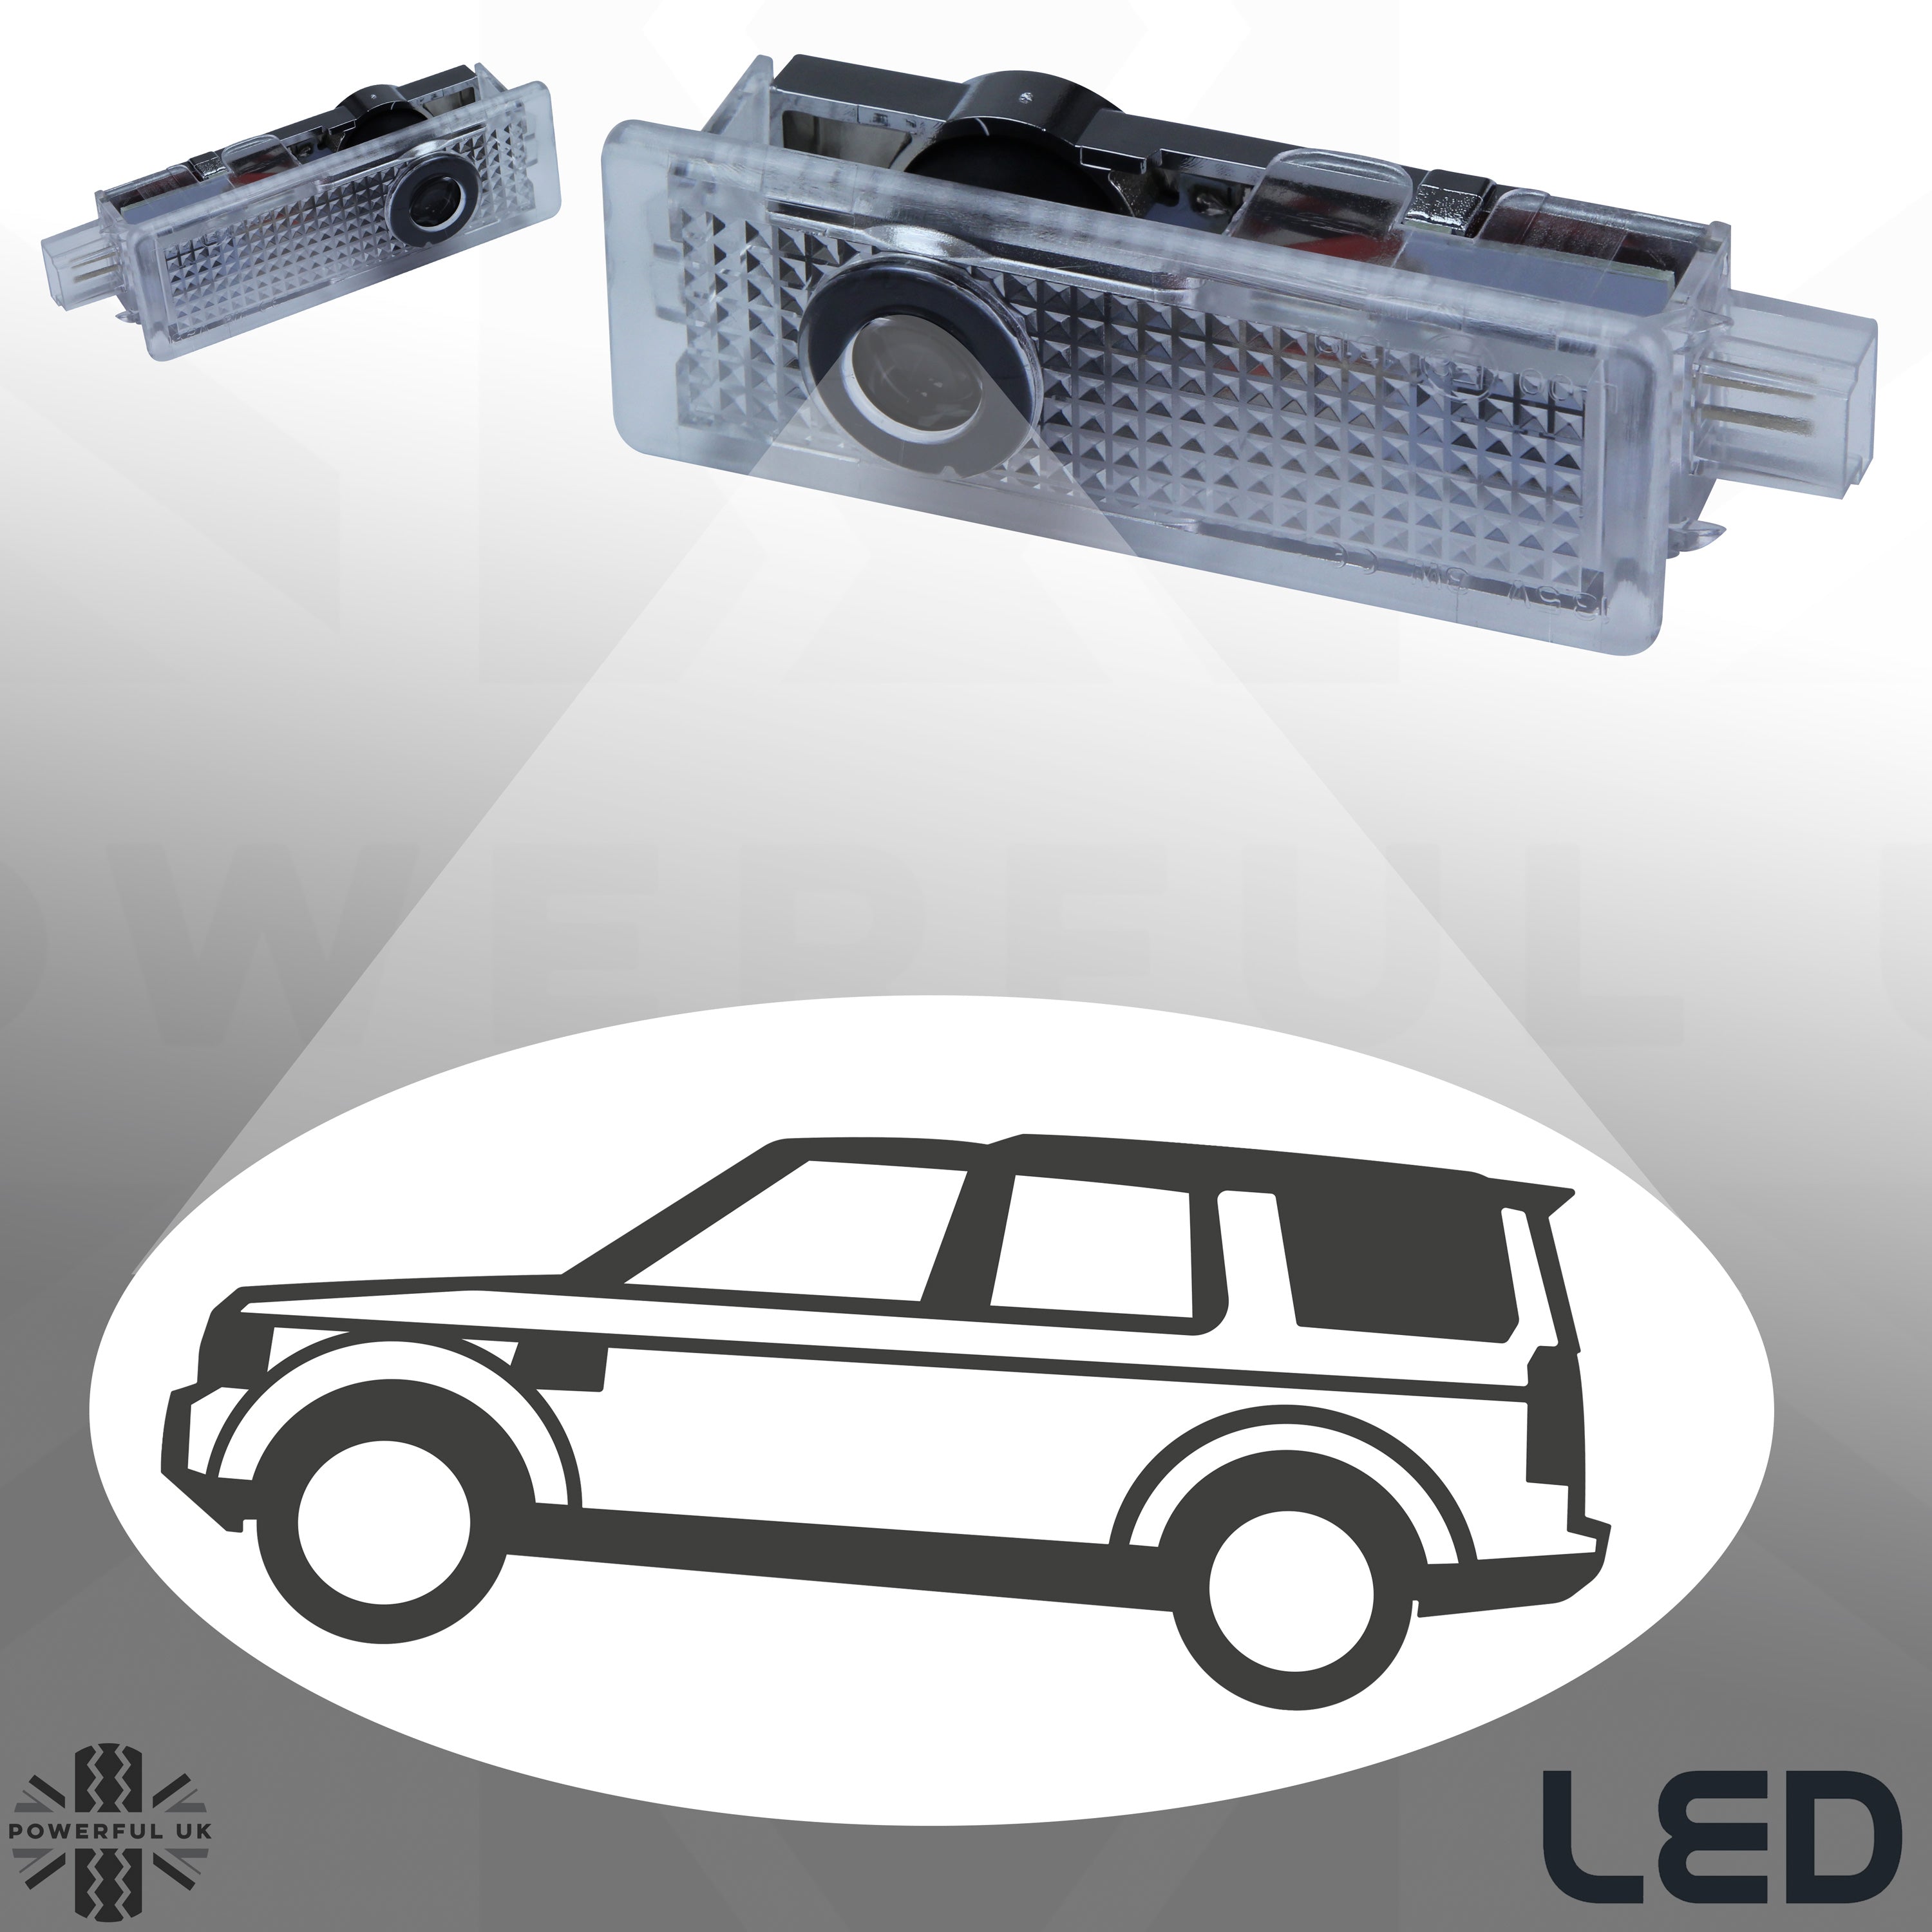 LED puddle Logo Lamp for Land Rover Discovery 3 & 4 – Powerful UK